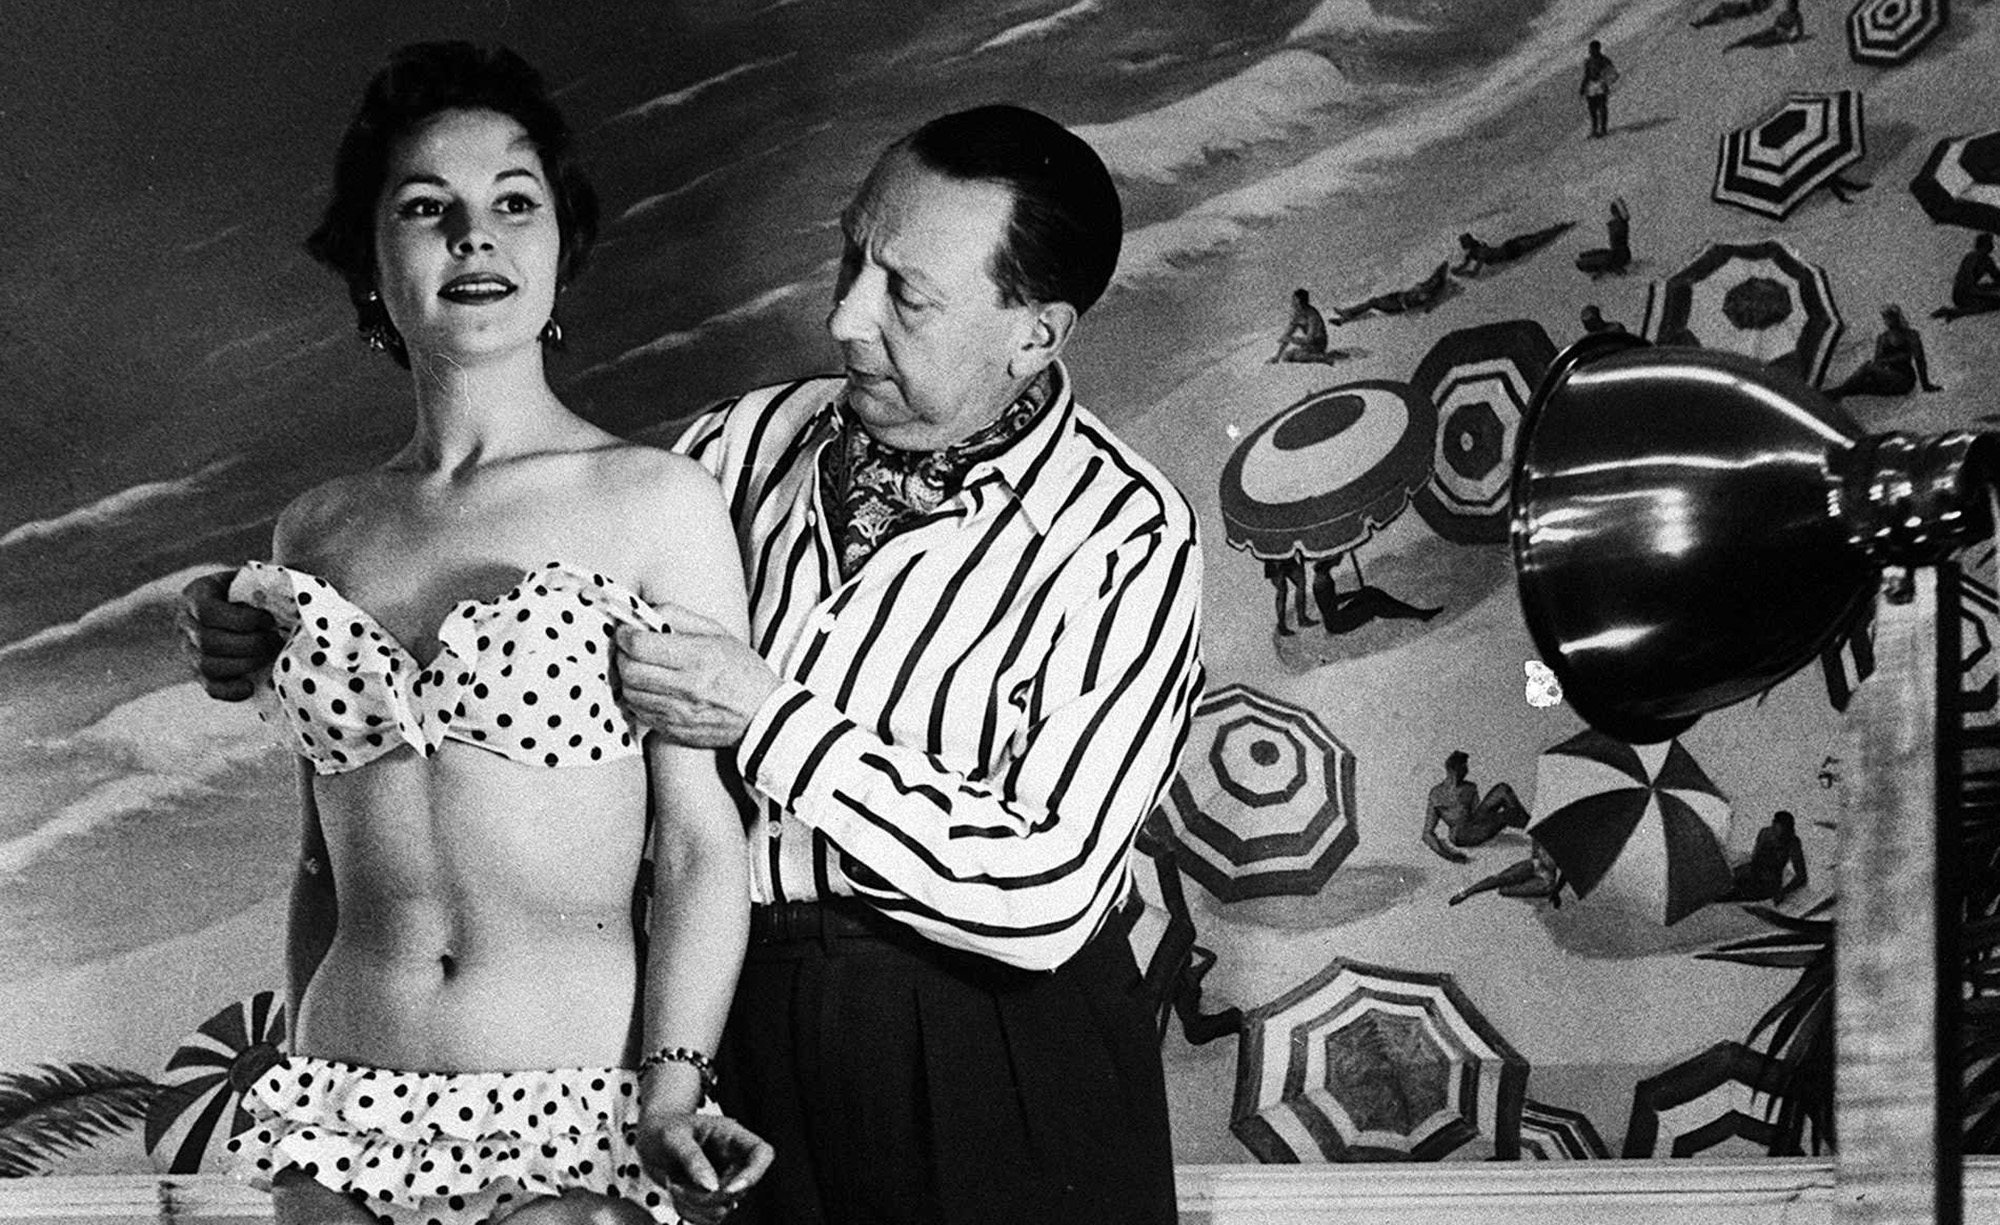 The World's First Bikini: When Was It Invented?